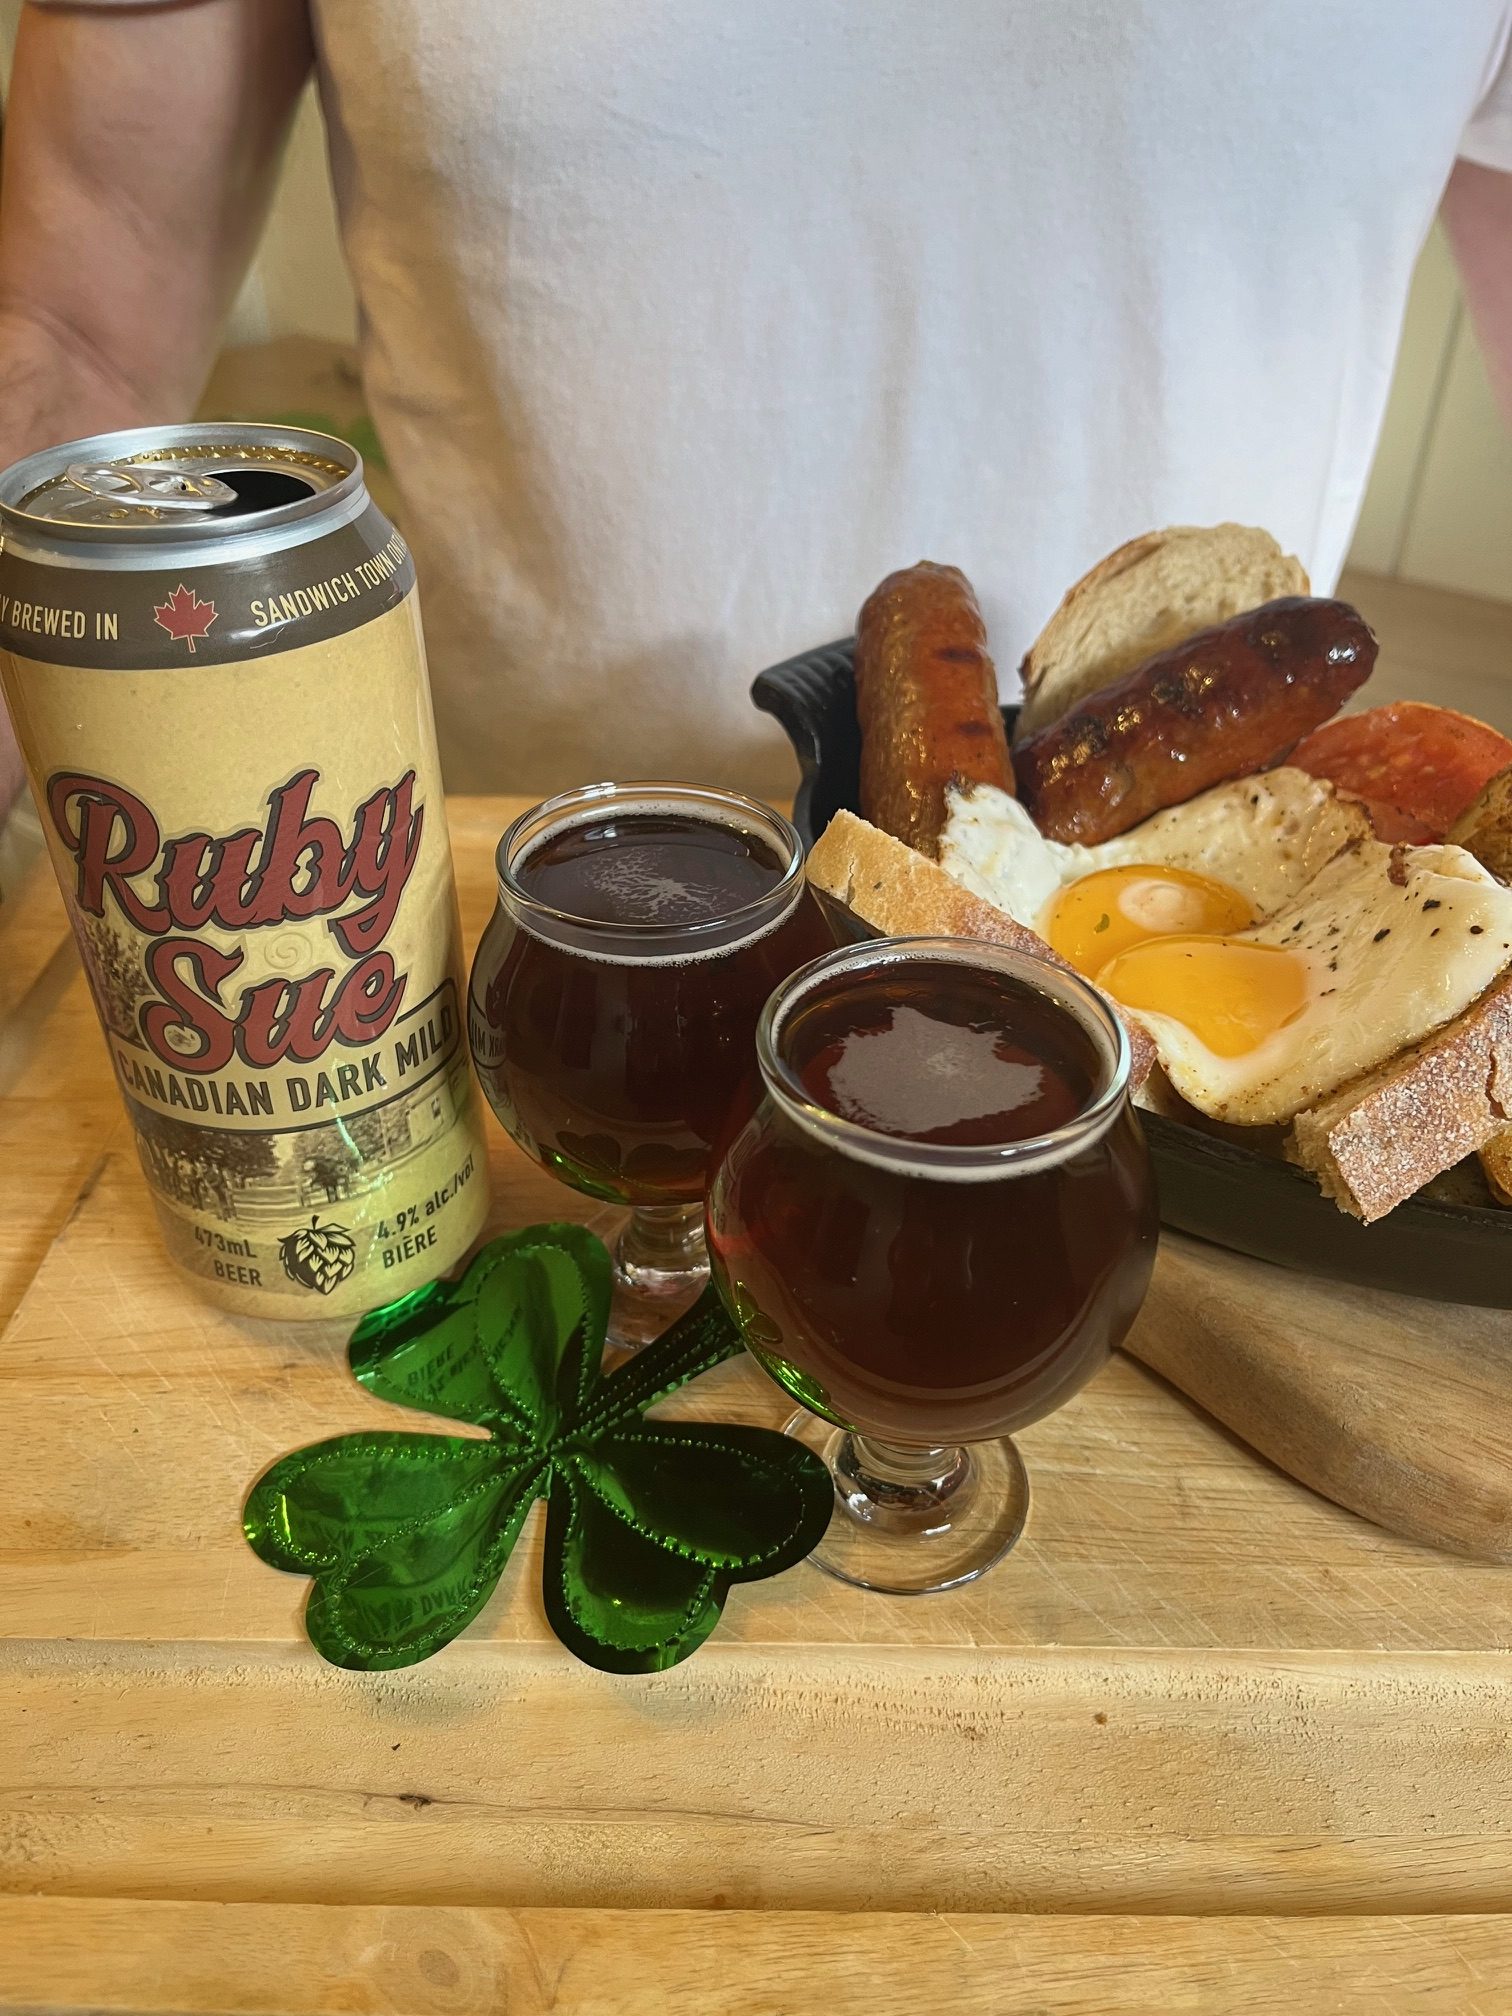 Featured image for “Sandwich Brewing Co. Ruby Sue Canadian Dark Mild with an Irish Breakfast.”